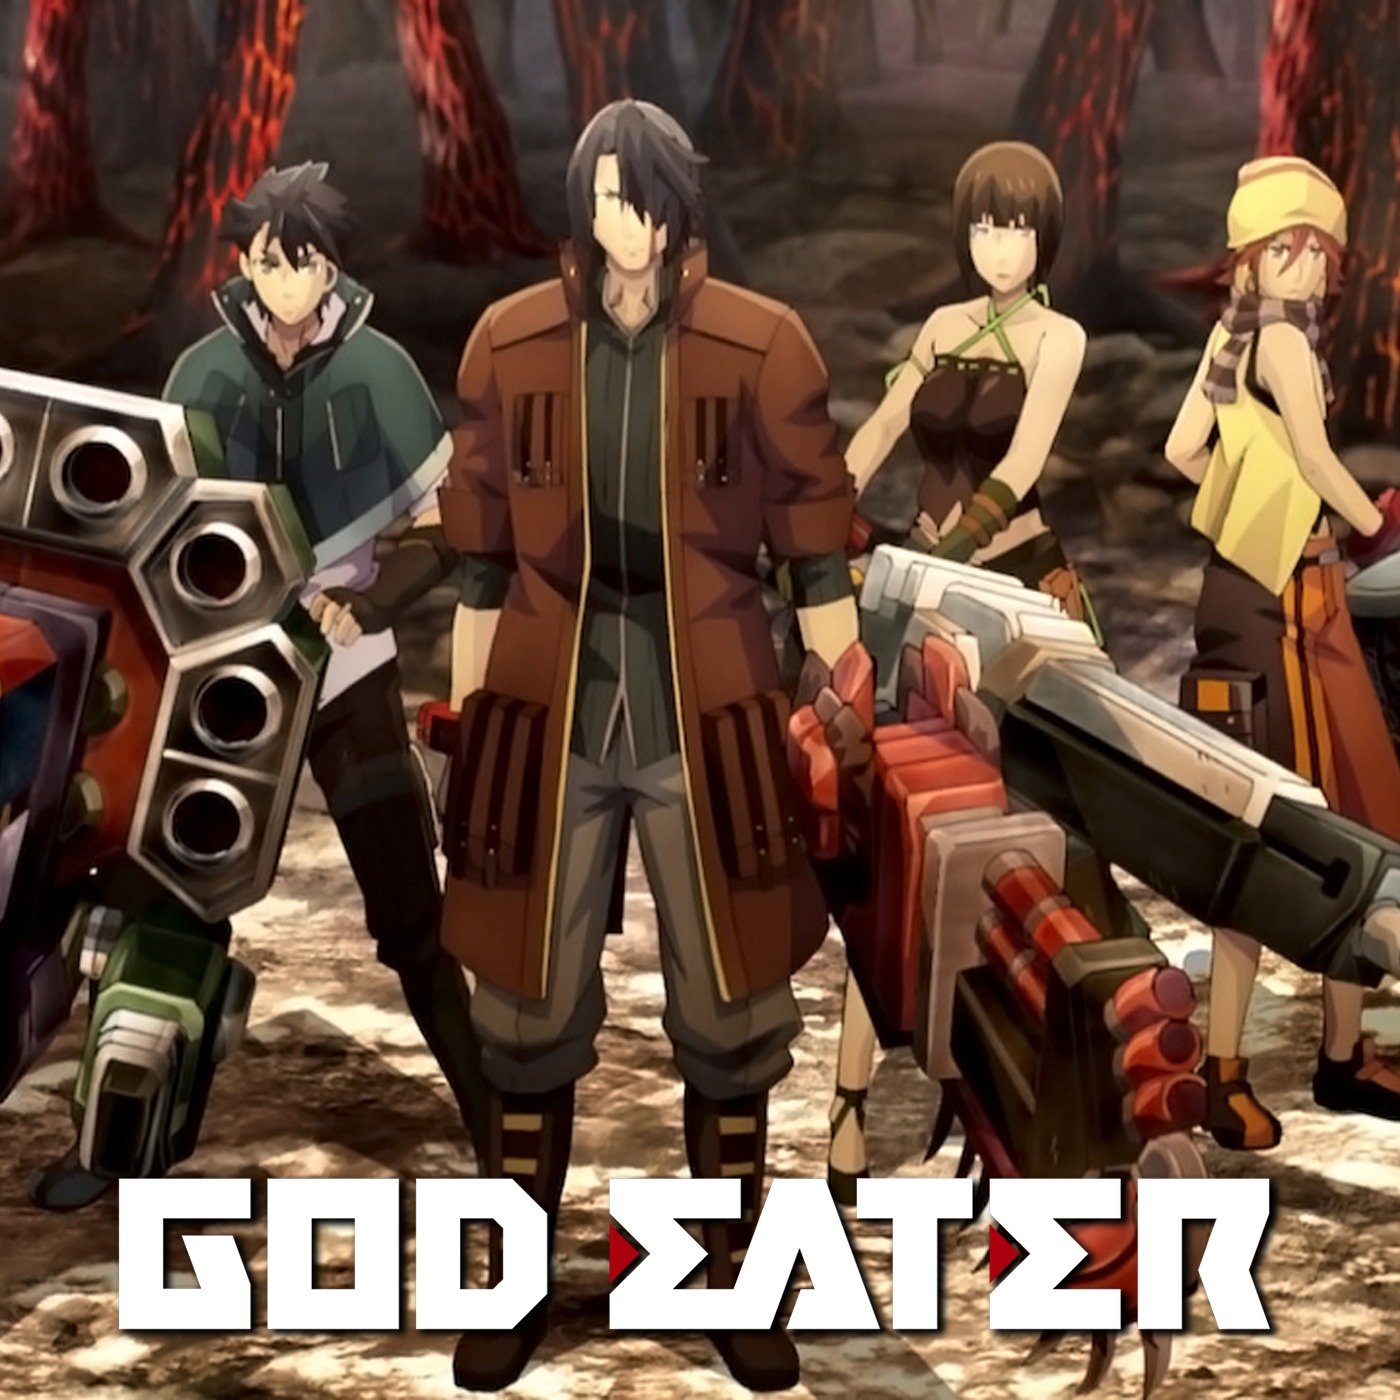 Best Anime About Monster Slaying